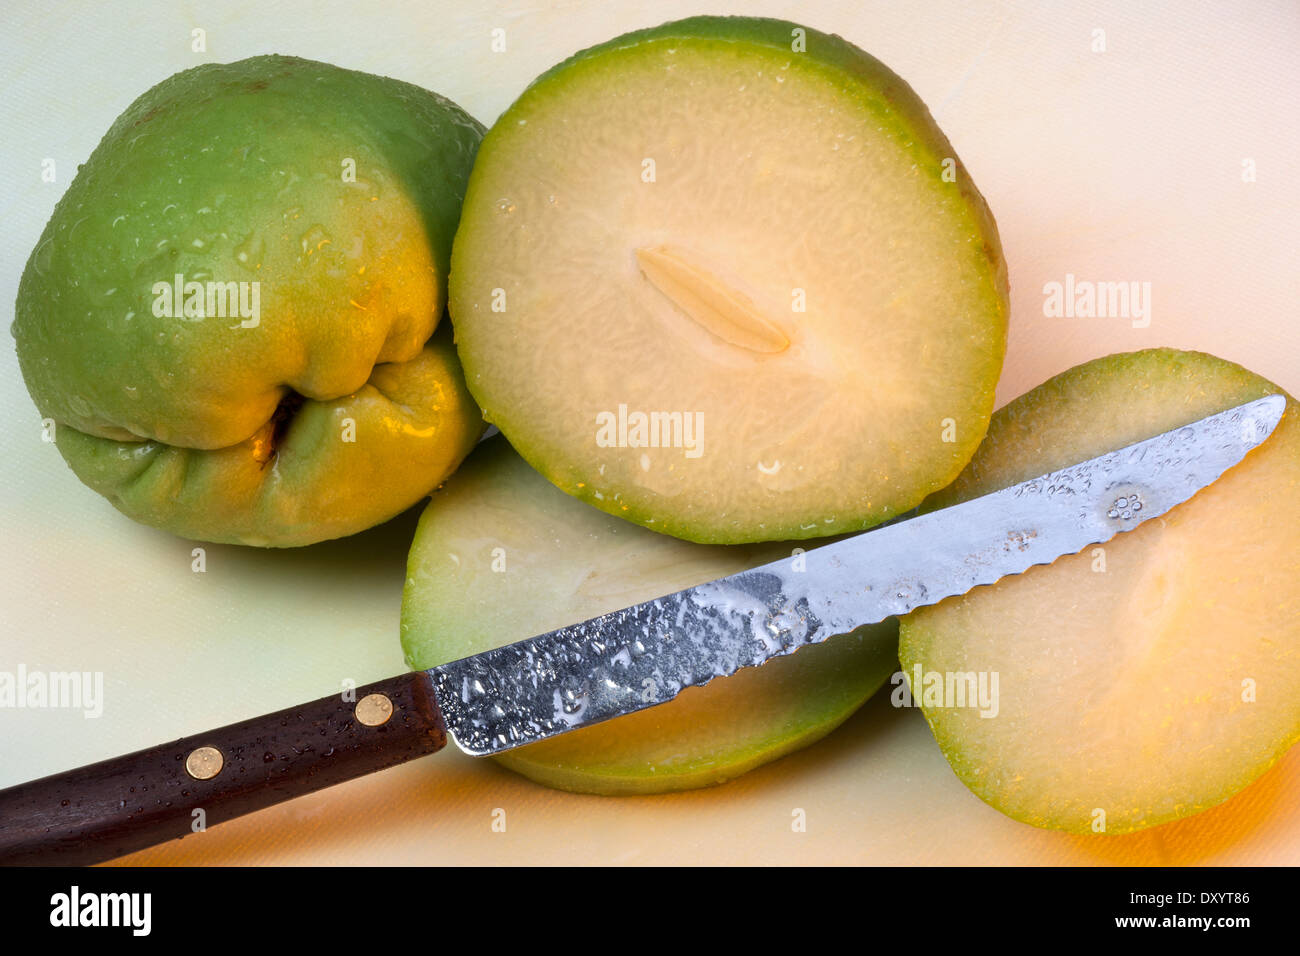 Chayote - a succulent green pear-shaped tropical fruit which resembles cucumber in flavor Stock Photo